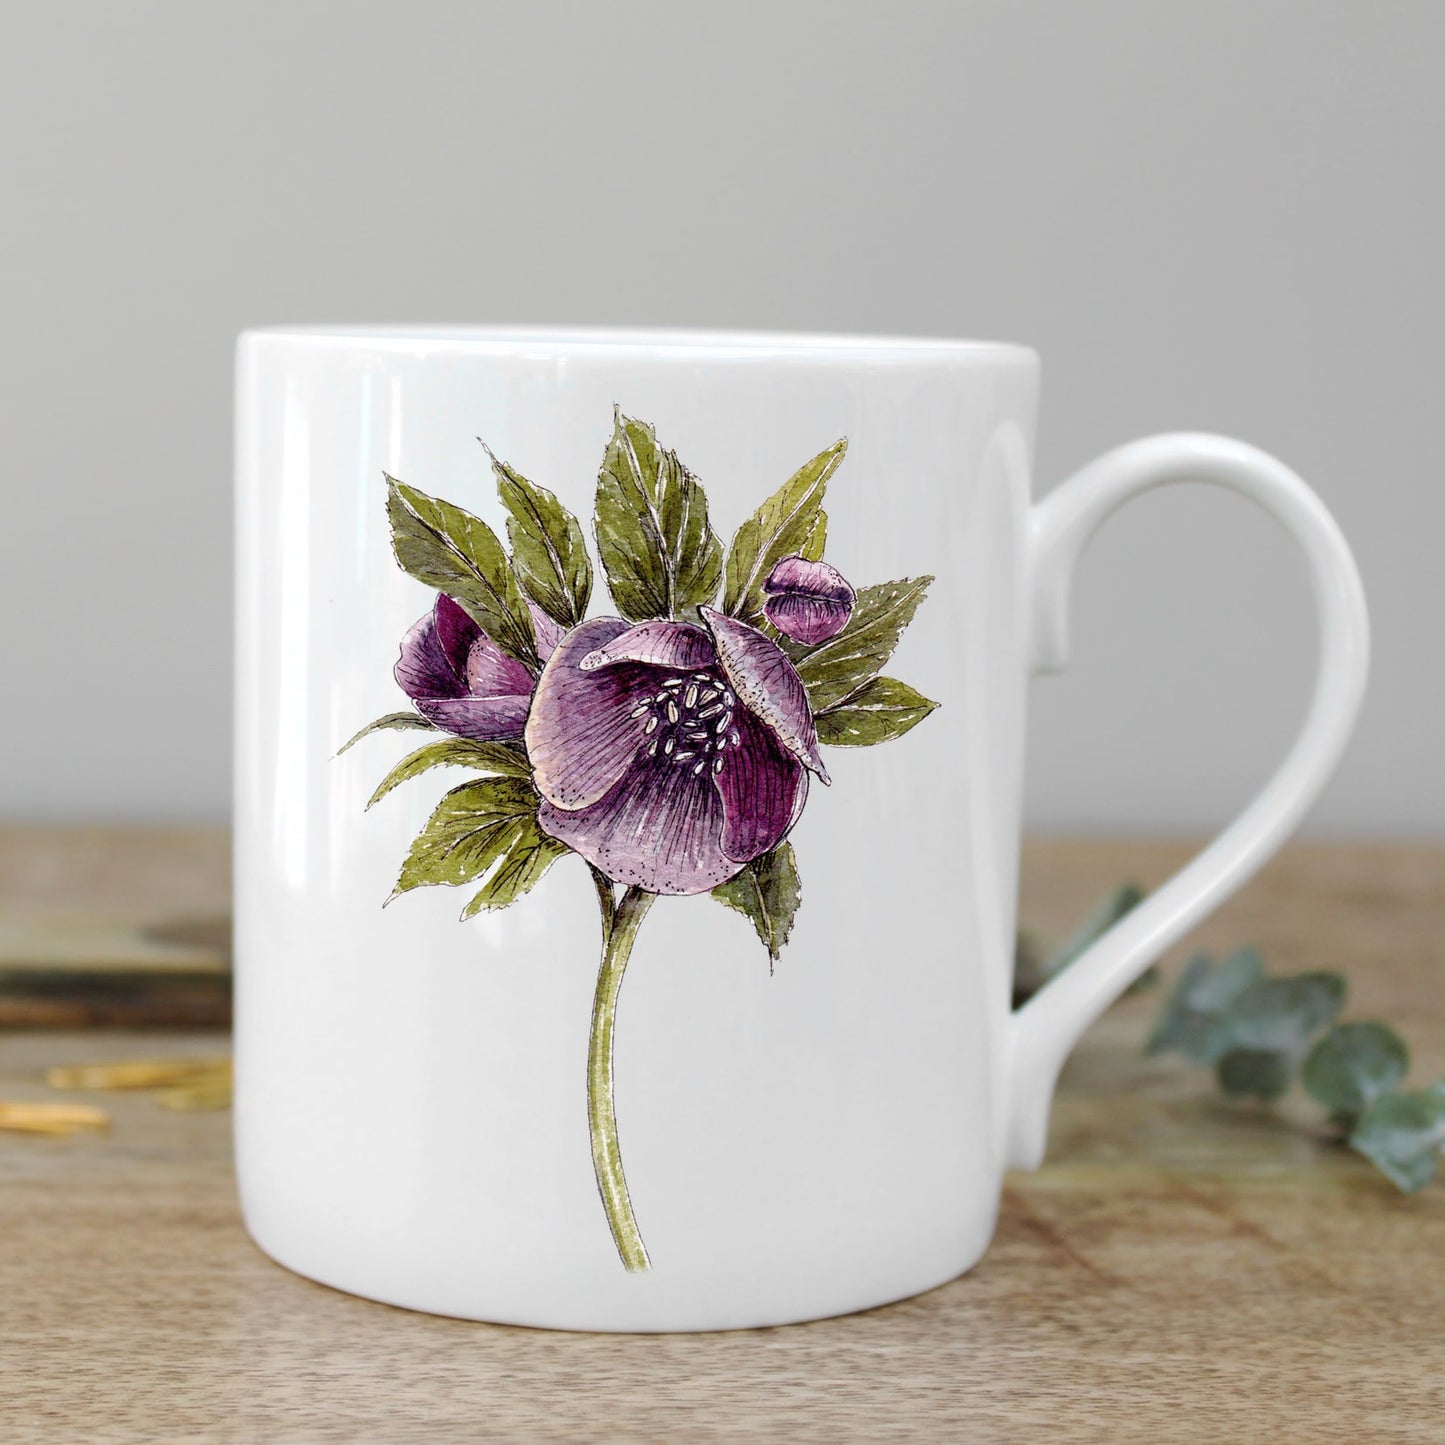 Load image into Gallery viewer, White mug with an illustration of a hellebore flower on it. Photographed on a wooden surface.
